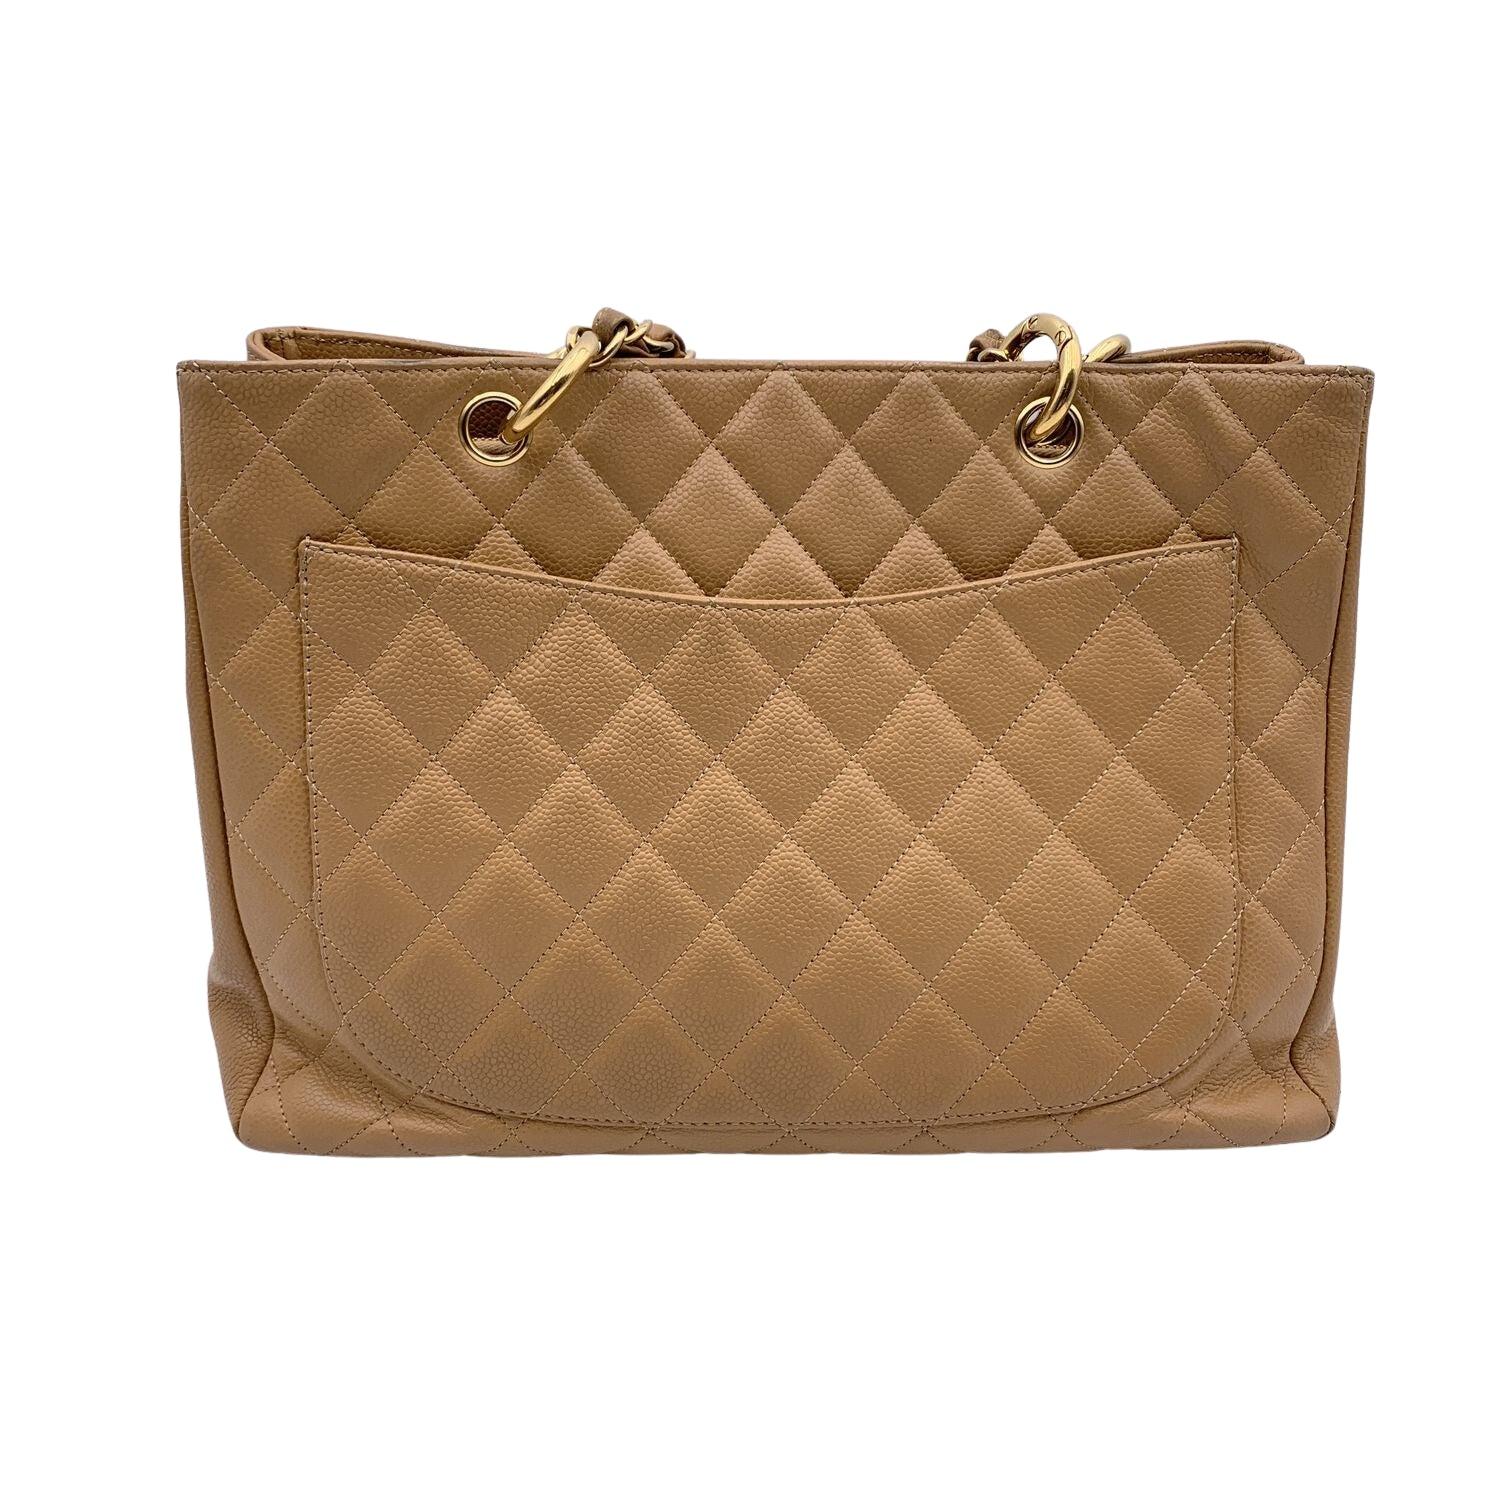 Chanel Beige Quilted Caviar Leather GST Grand Shopping Tote Bag In Excellent Condition For Sale In Rome, Rome